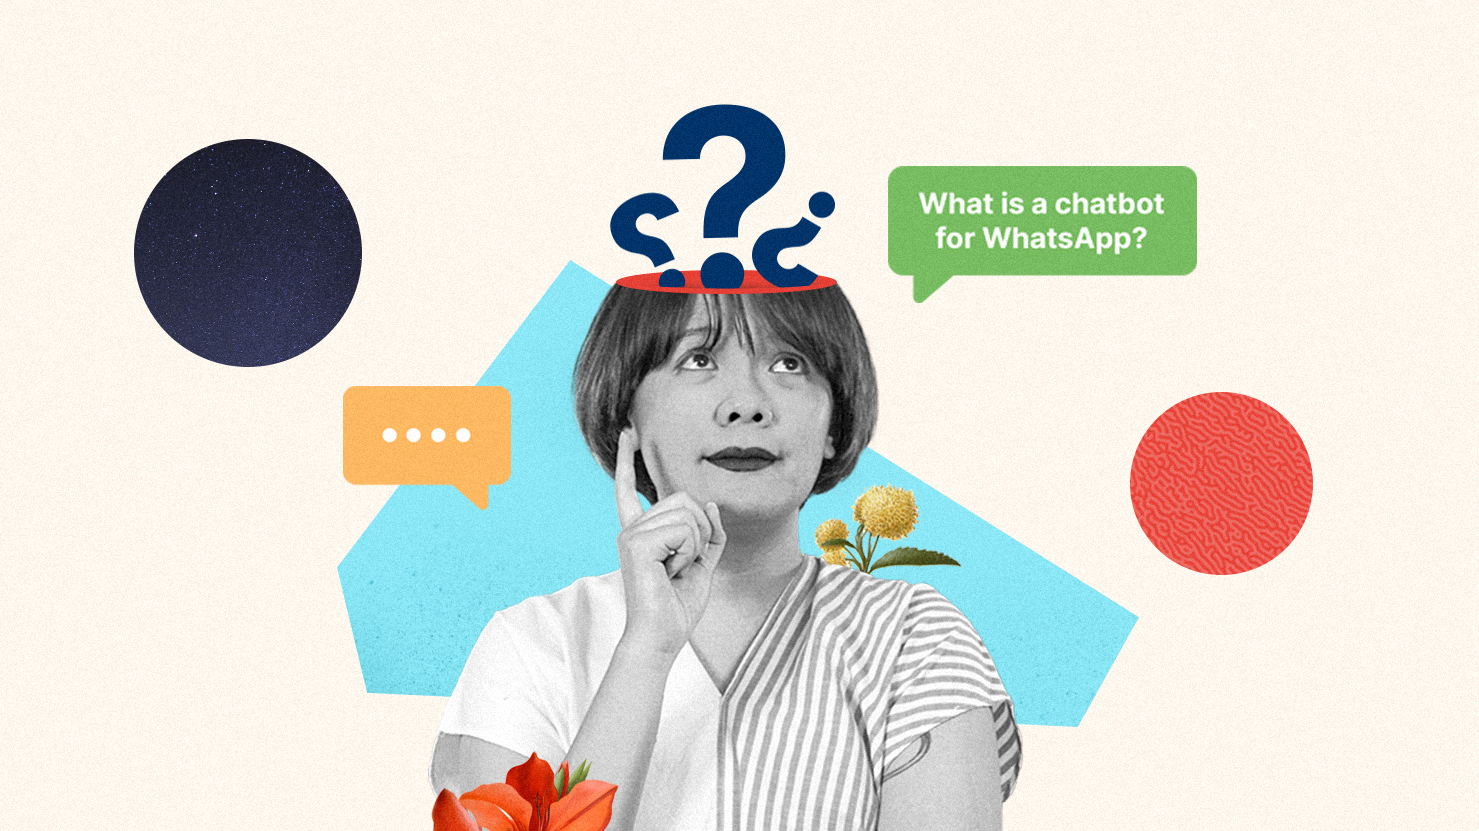 With a lot of businesses utilizing chatbot for their WhatsApp accounts, we will discuss about what exactly is chatbot for WhatsApp (Photo and Illustration by Kata.ai)